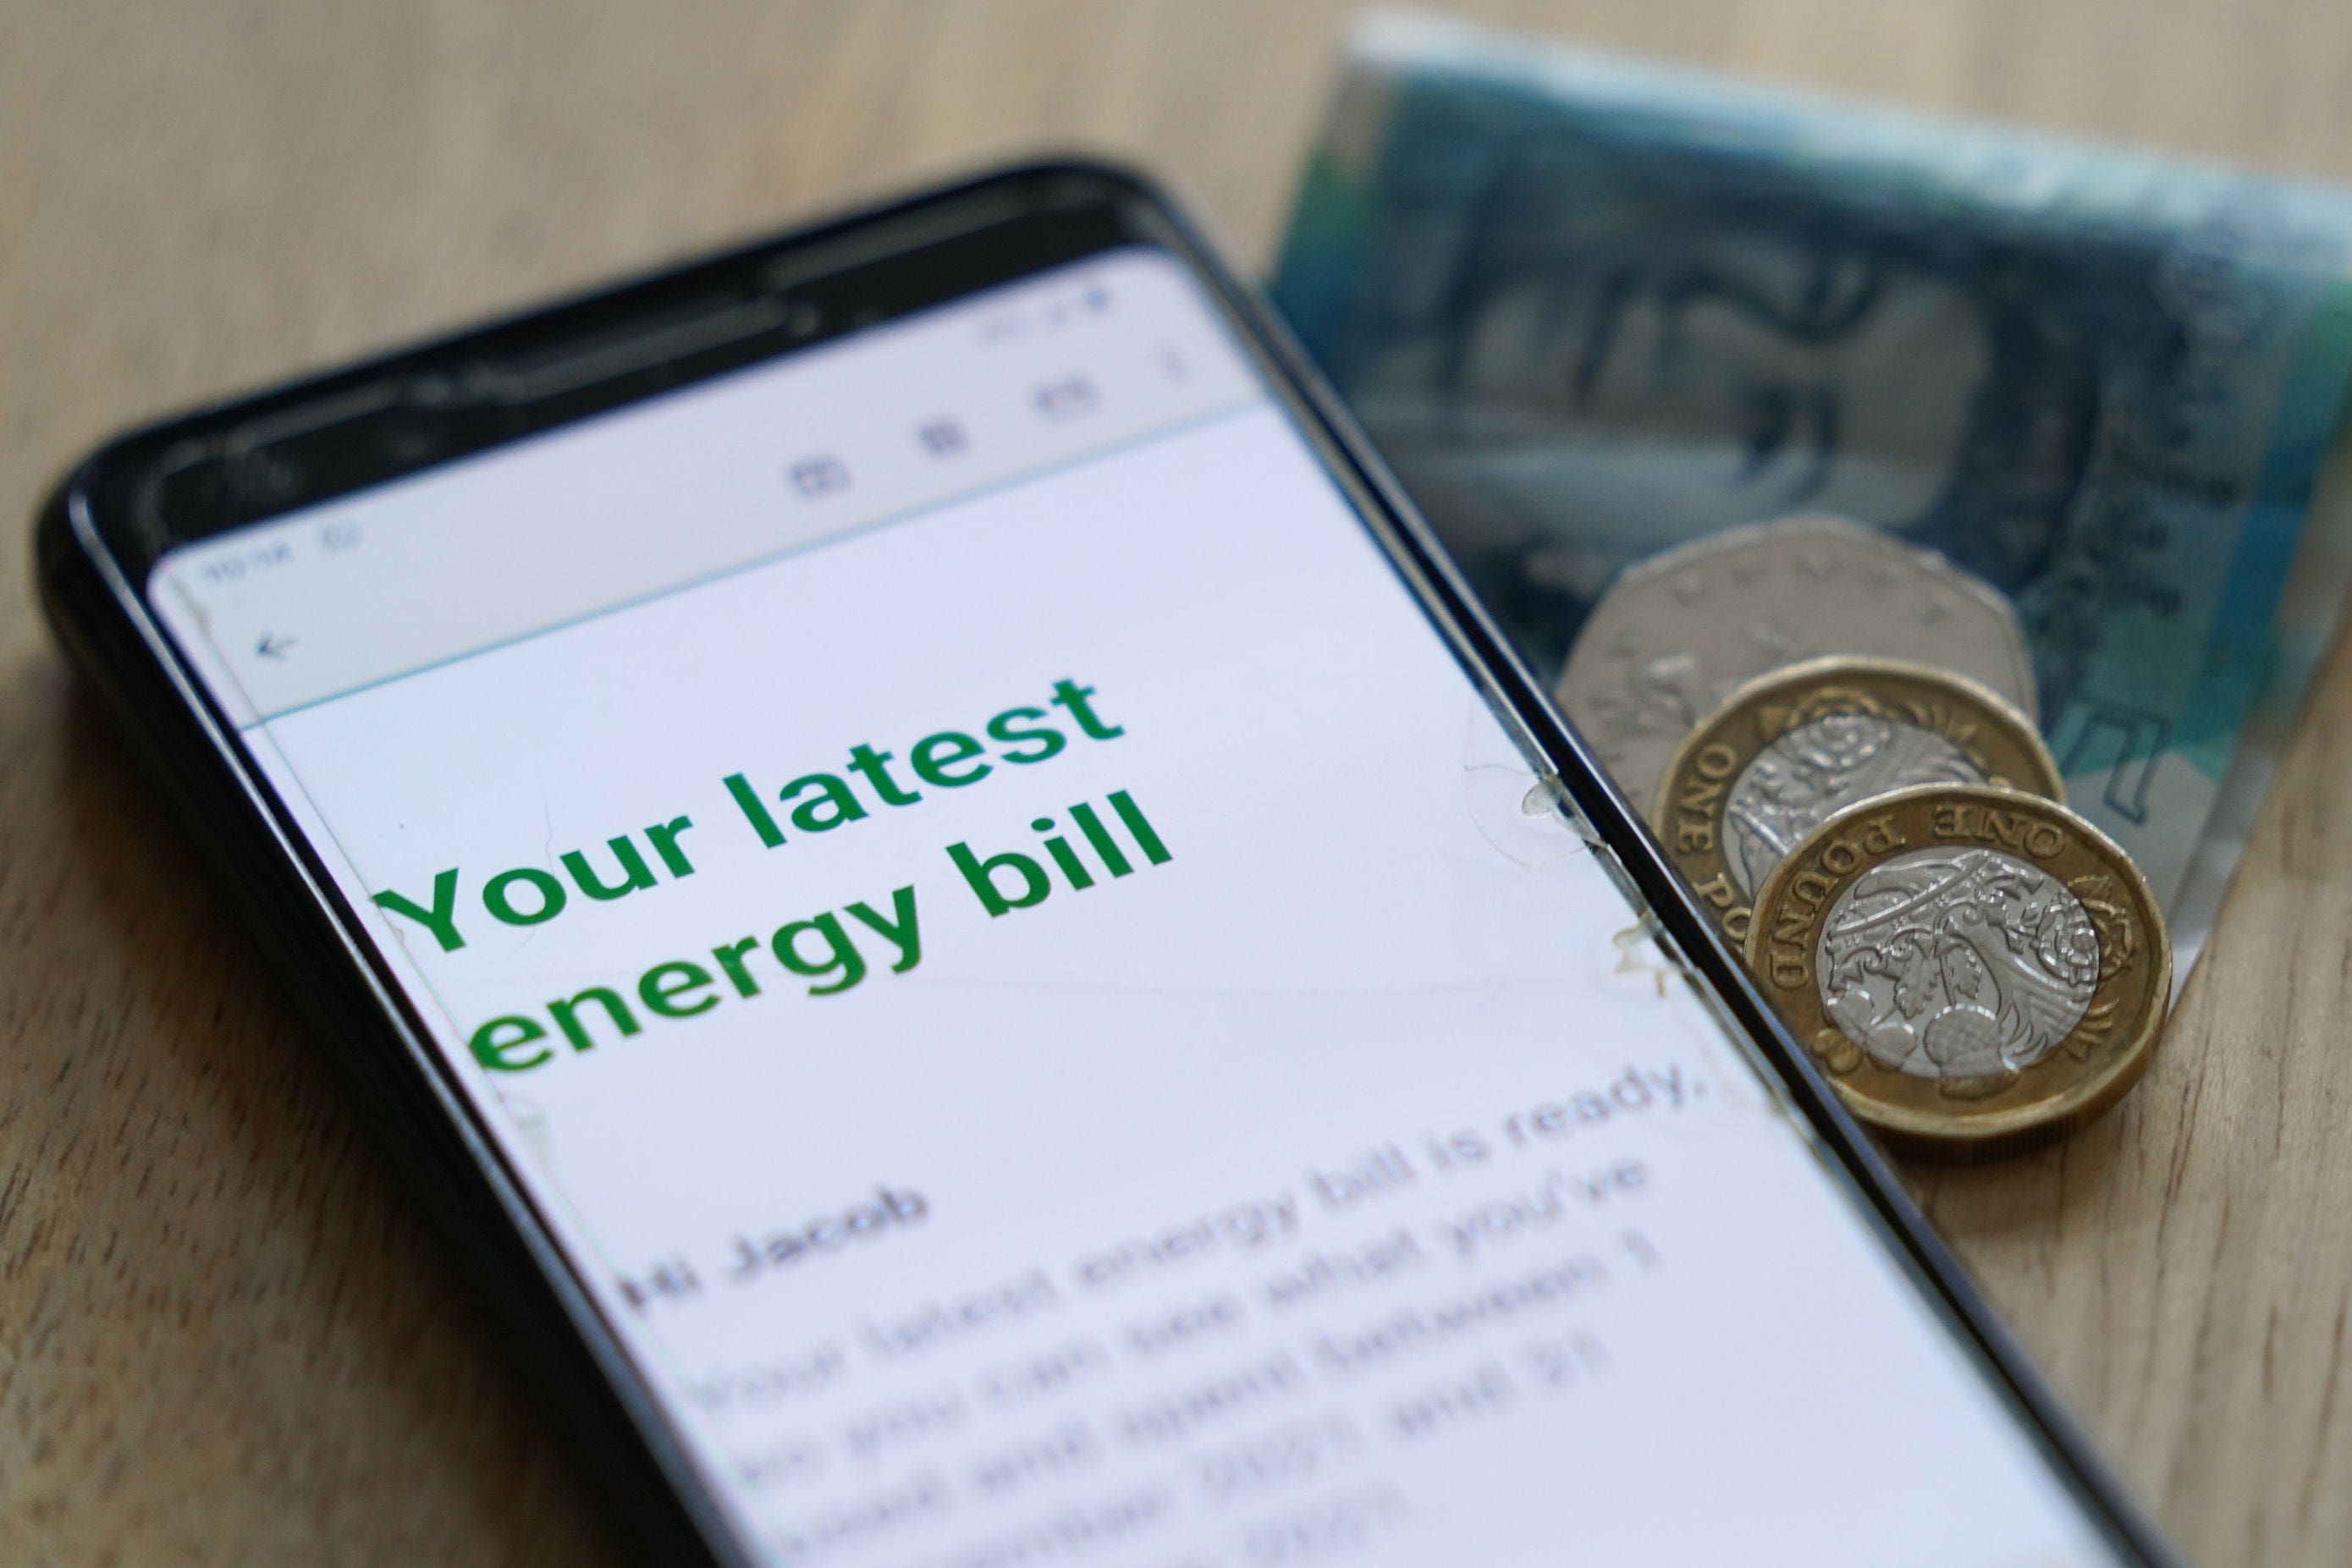 More than nine million households have built up no energy credit going into winter a recent survey found